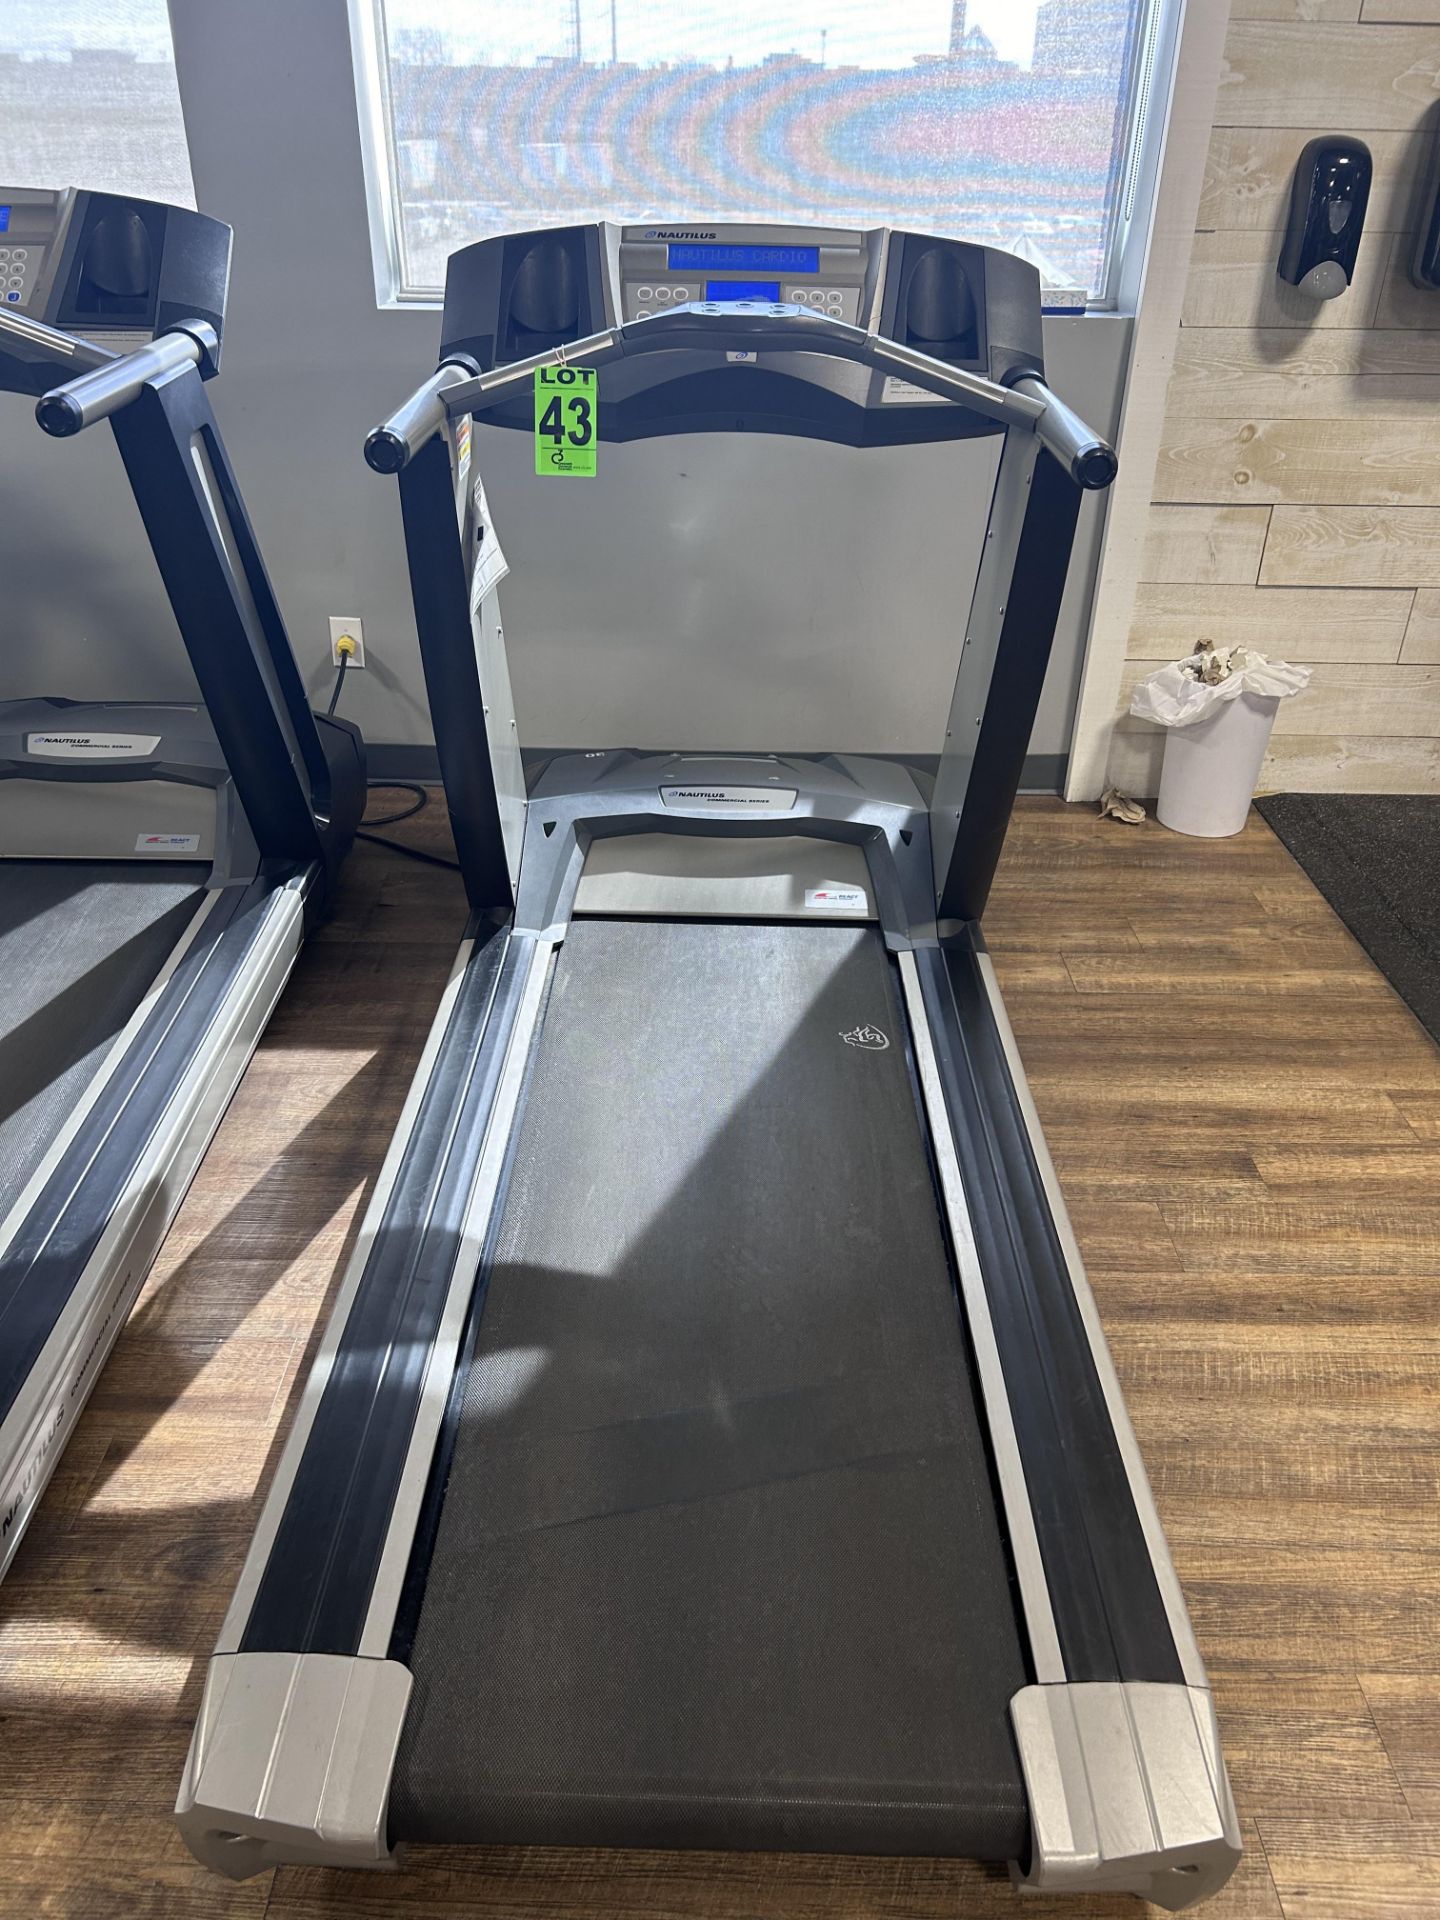 NAUTILUS mod. T914 Commercial Treadmill with backlit LED Console